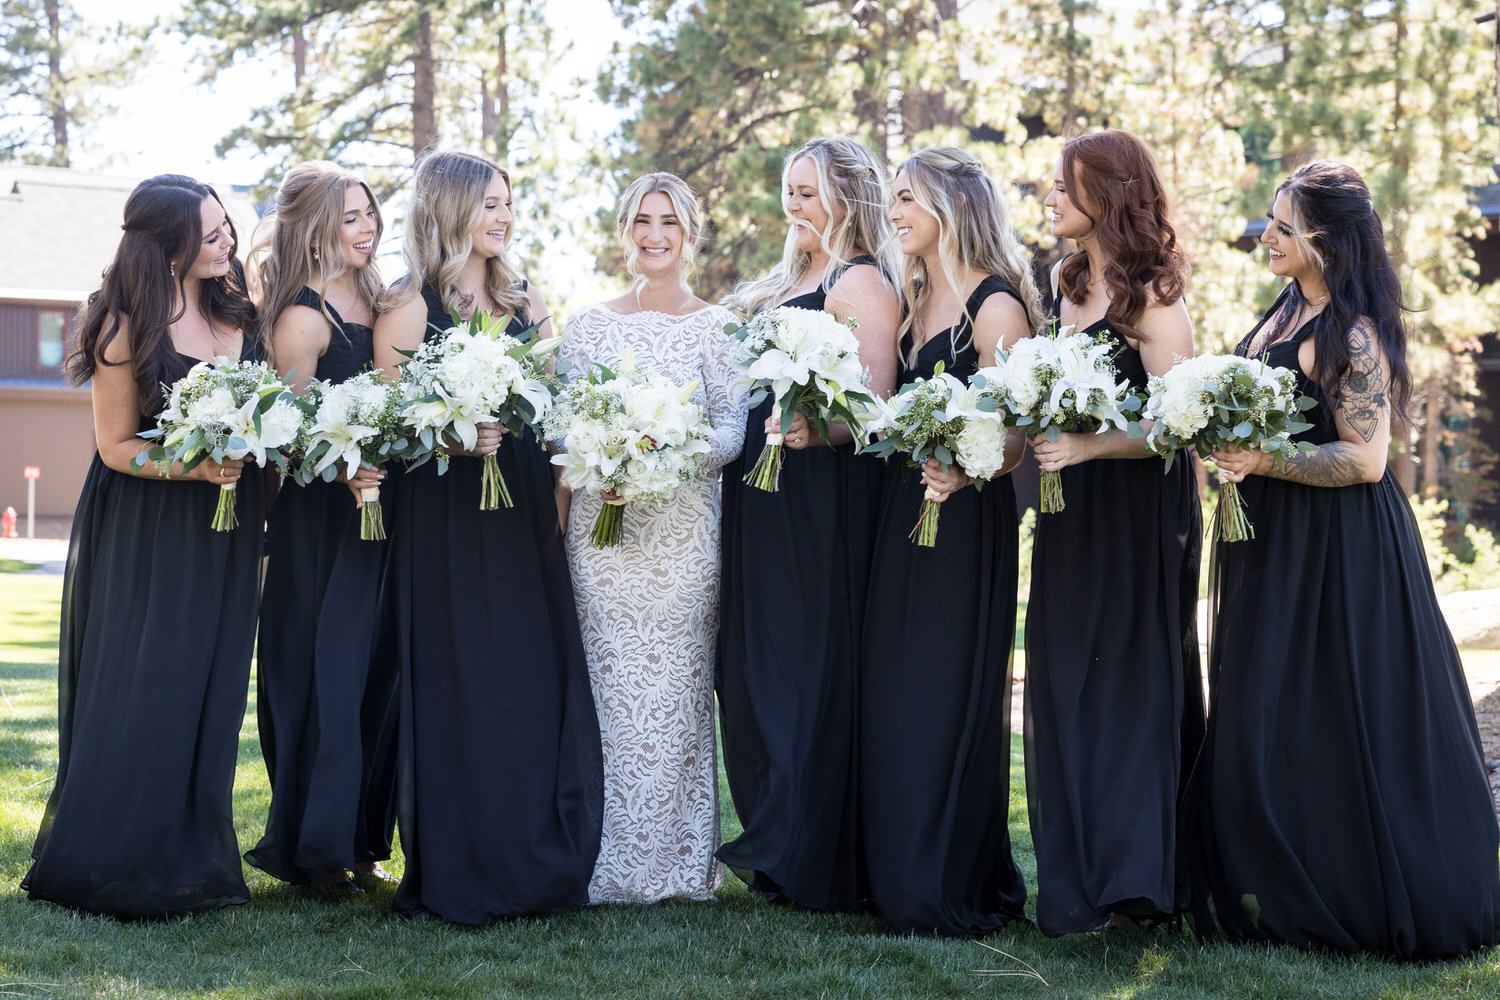 Black bridesmaid dresses are a good choice for a modern, outdoor wedding.